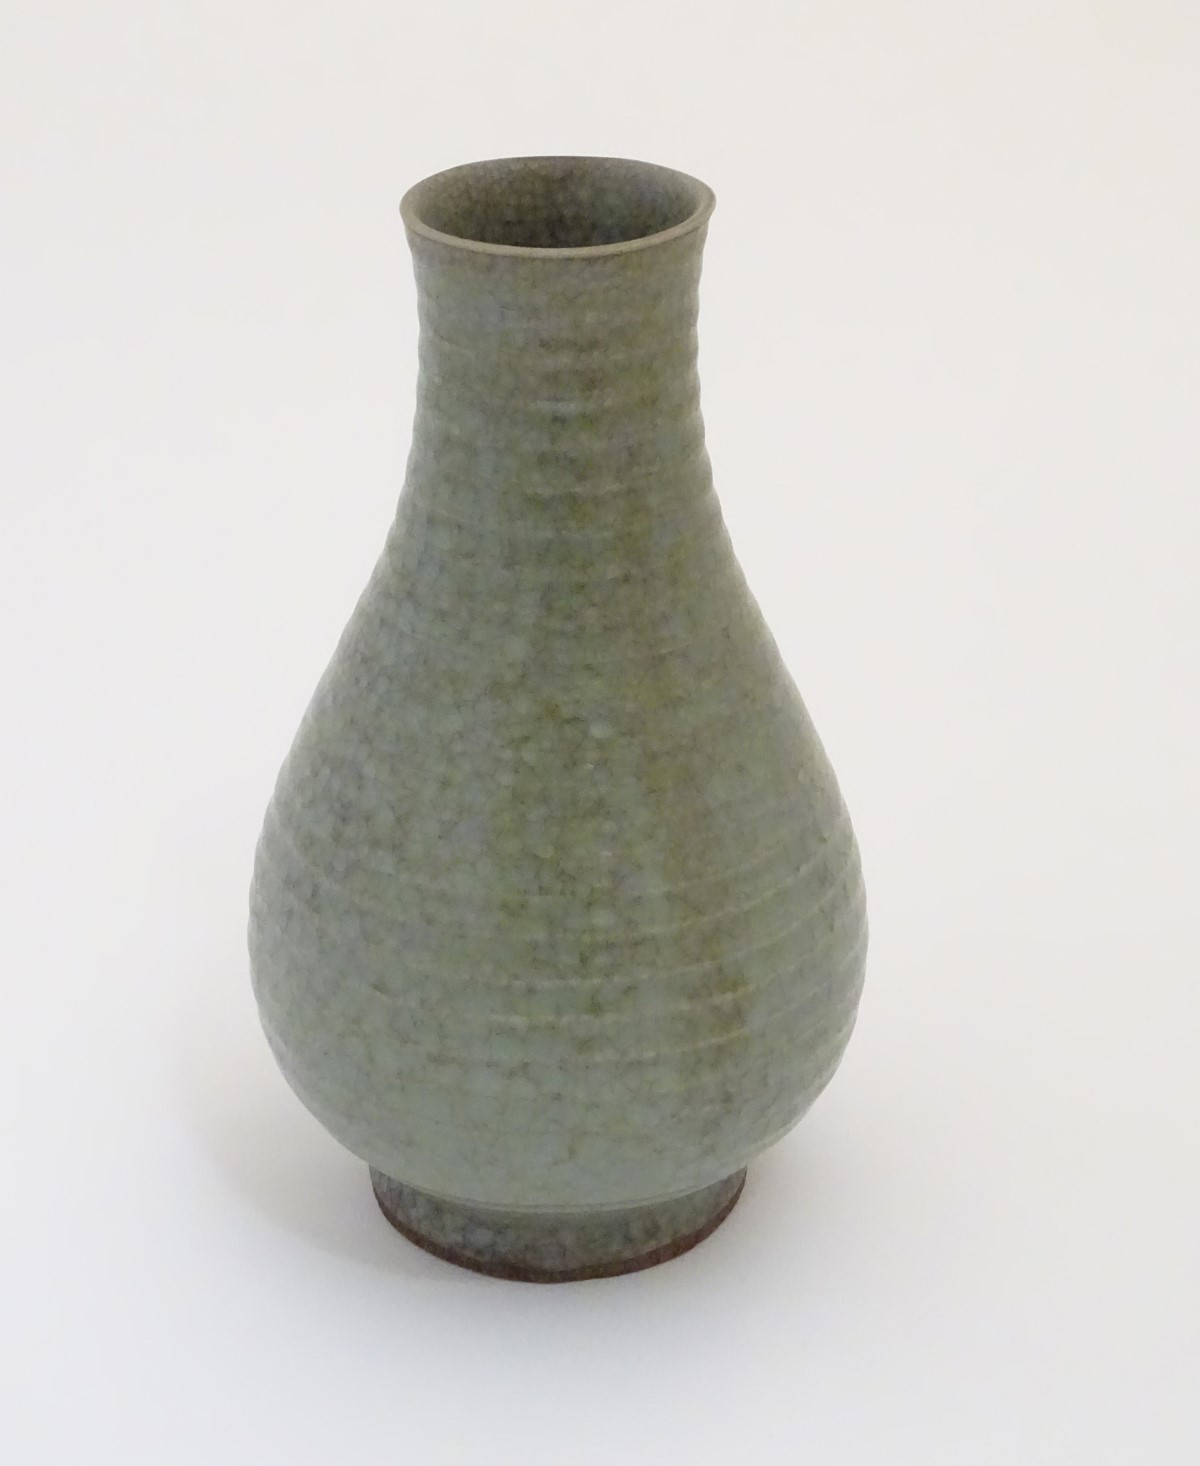 A Chinese celadon pear-shaped vase with a crackle glaze. Approx. 9 3/4" high. - Image 2 of 5